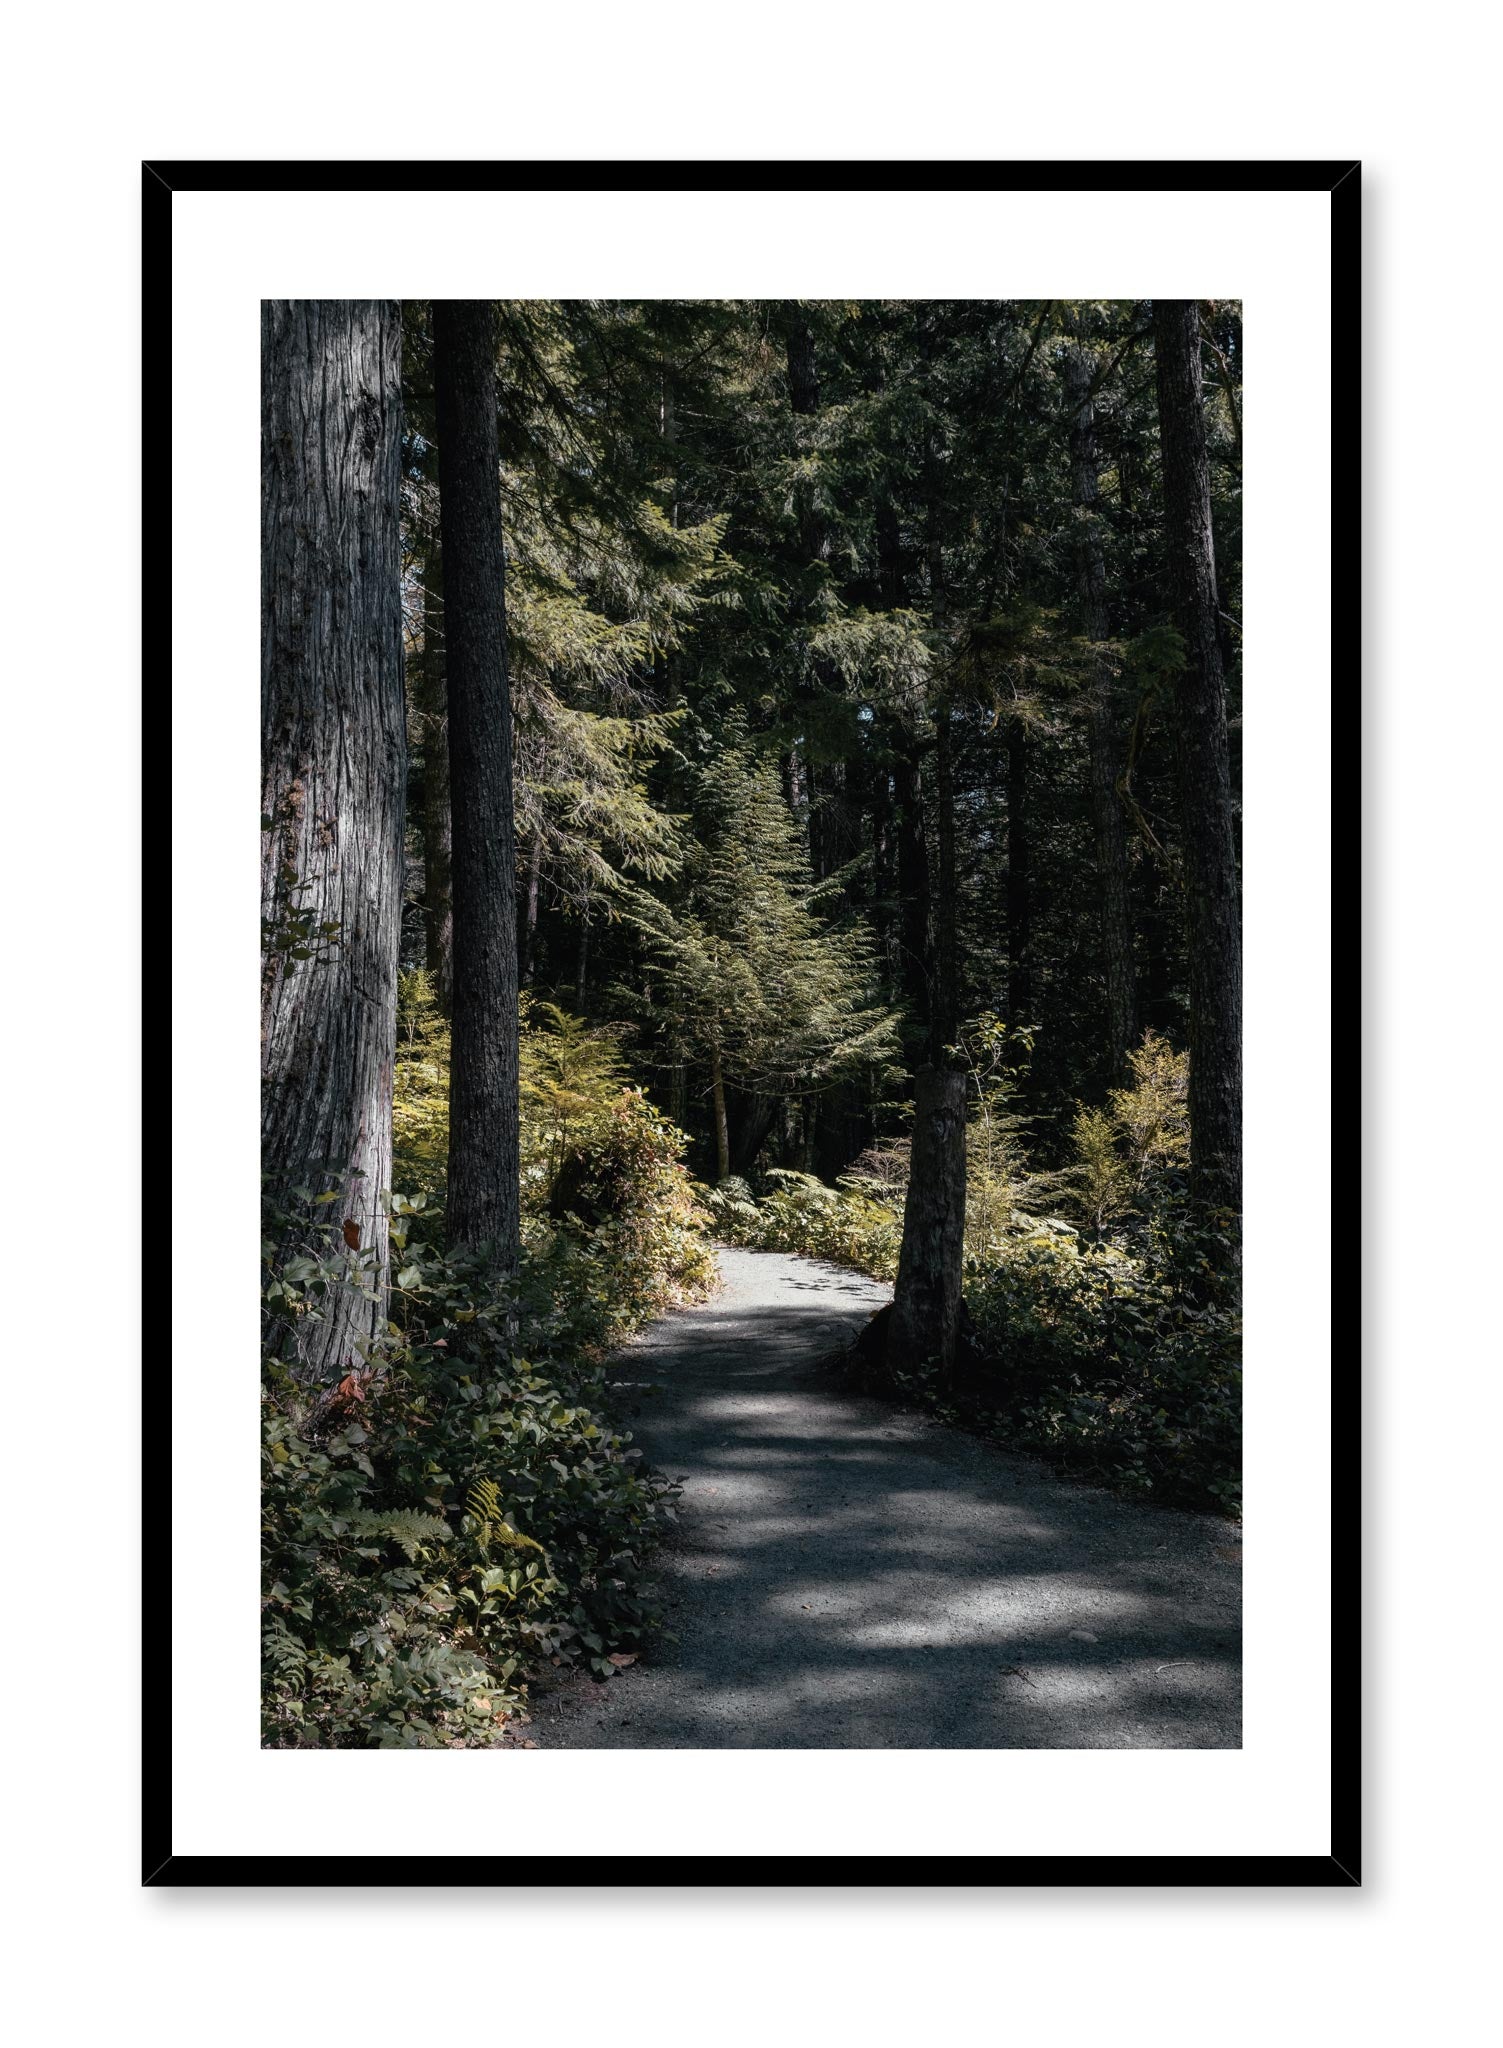 Minimalist design poster by Opposite Wall with nature photography of Vancouver Island Bright Days forest path